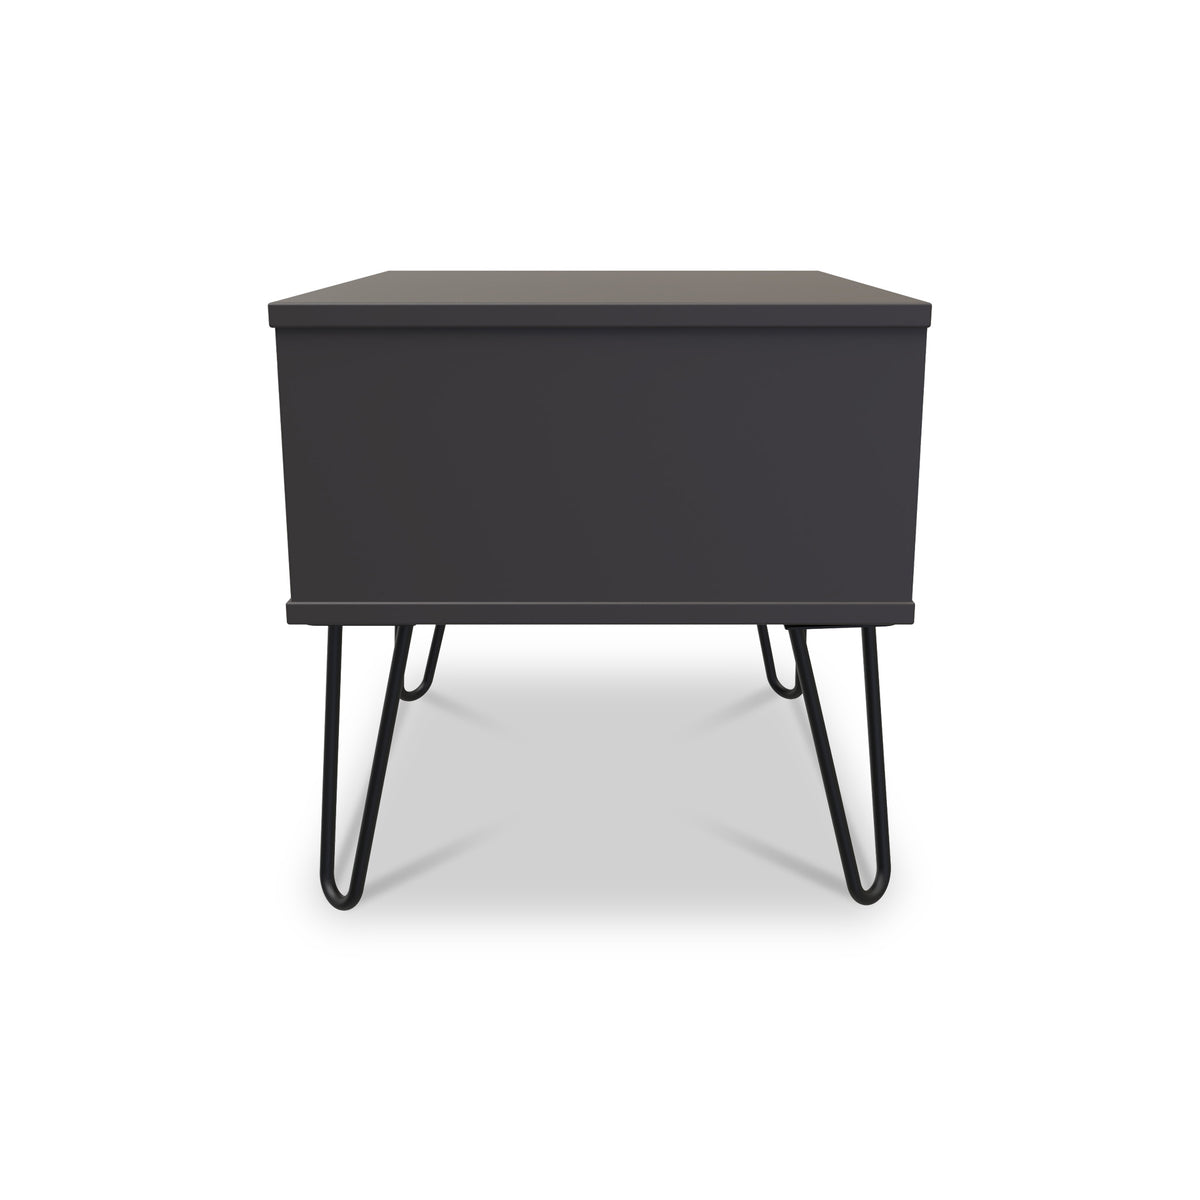 Moreno Graphite Grey 1 Drawer Sofa Side Lamp Table with Hairpin Legs from Roseland furniture